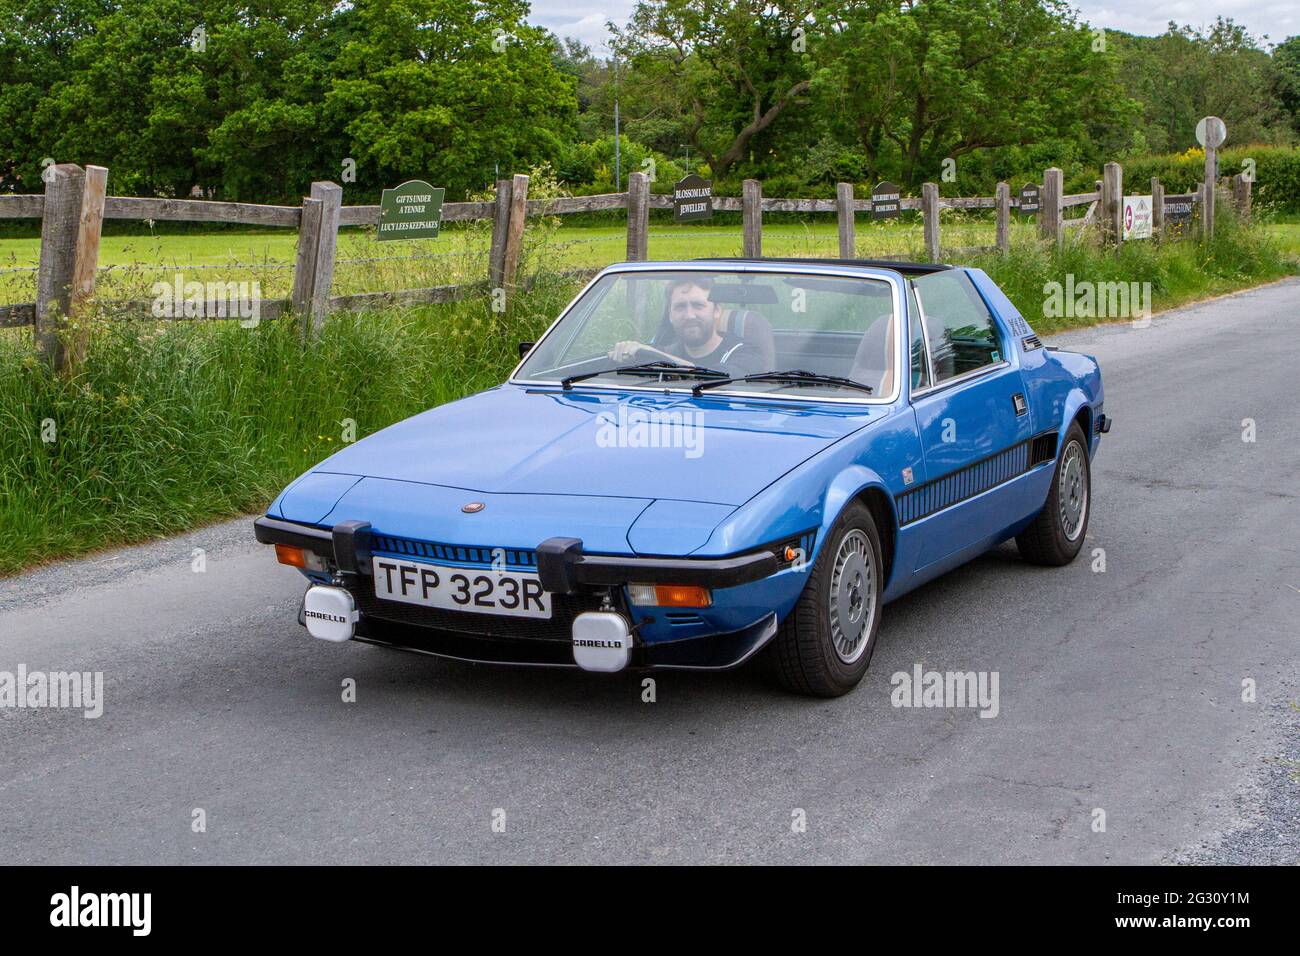 1977 70s blue Fiat X1/9 sports car at the 58th Annual Manchester to Blackpool Vintage & Classic Car Run The heritage event is a ‘Touring Assembly’ Stock Photo